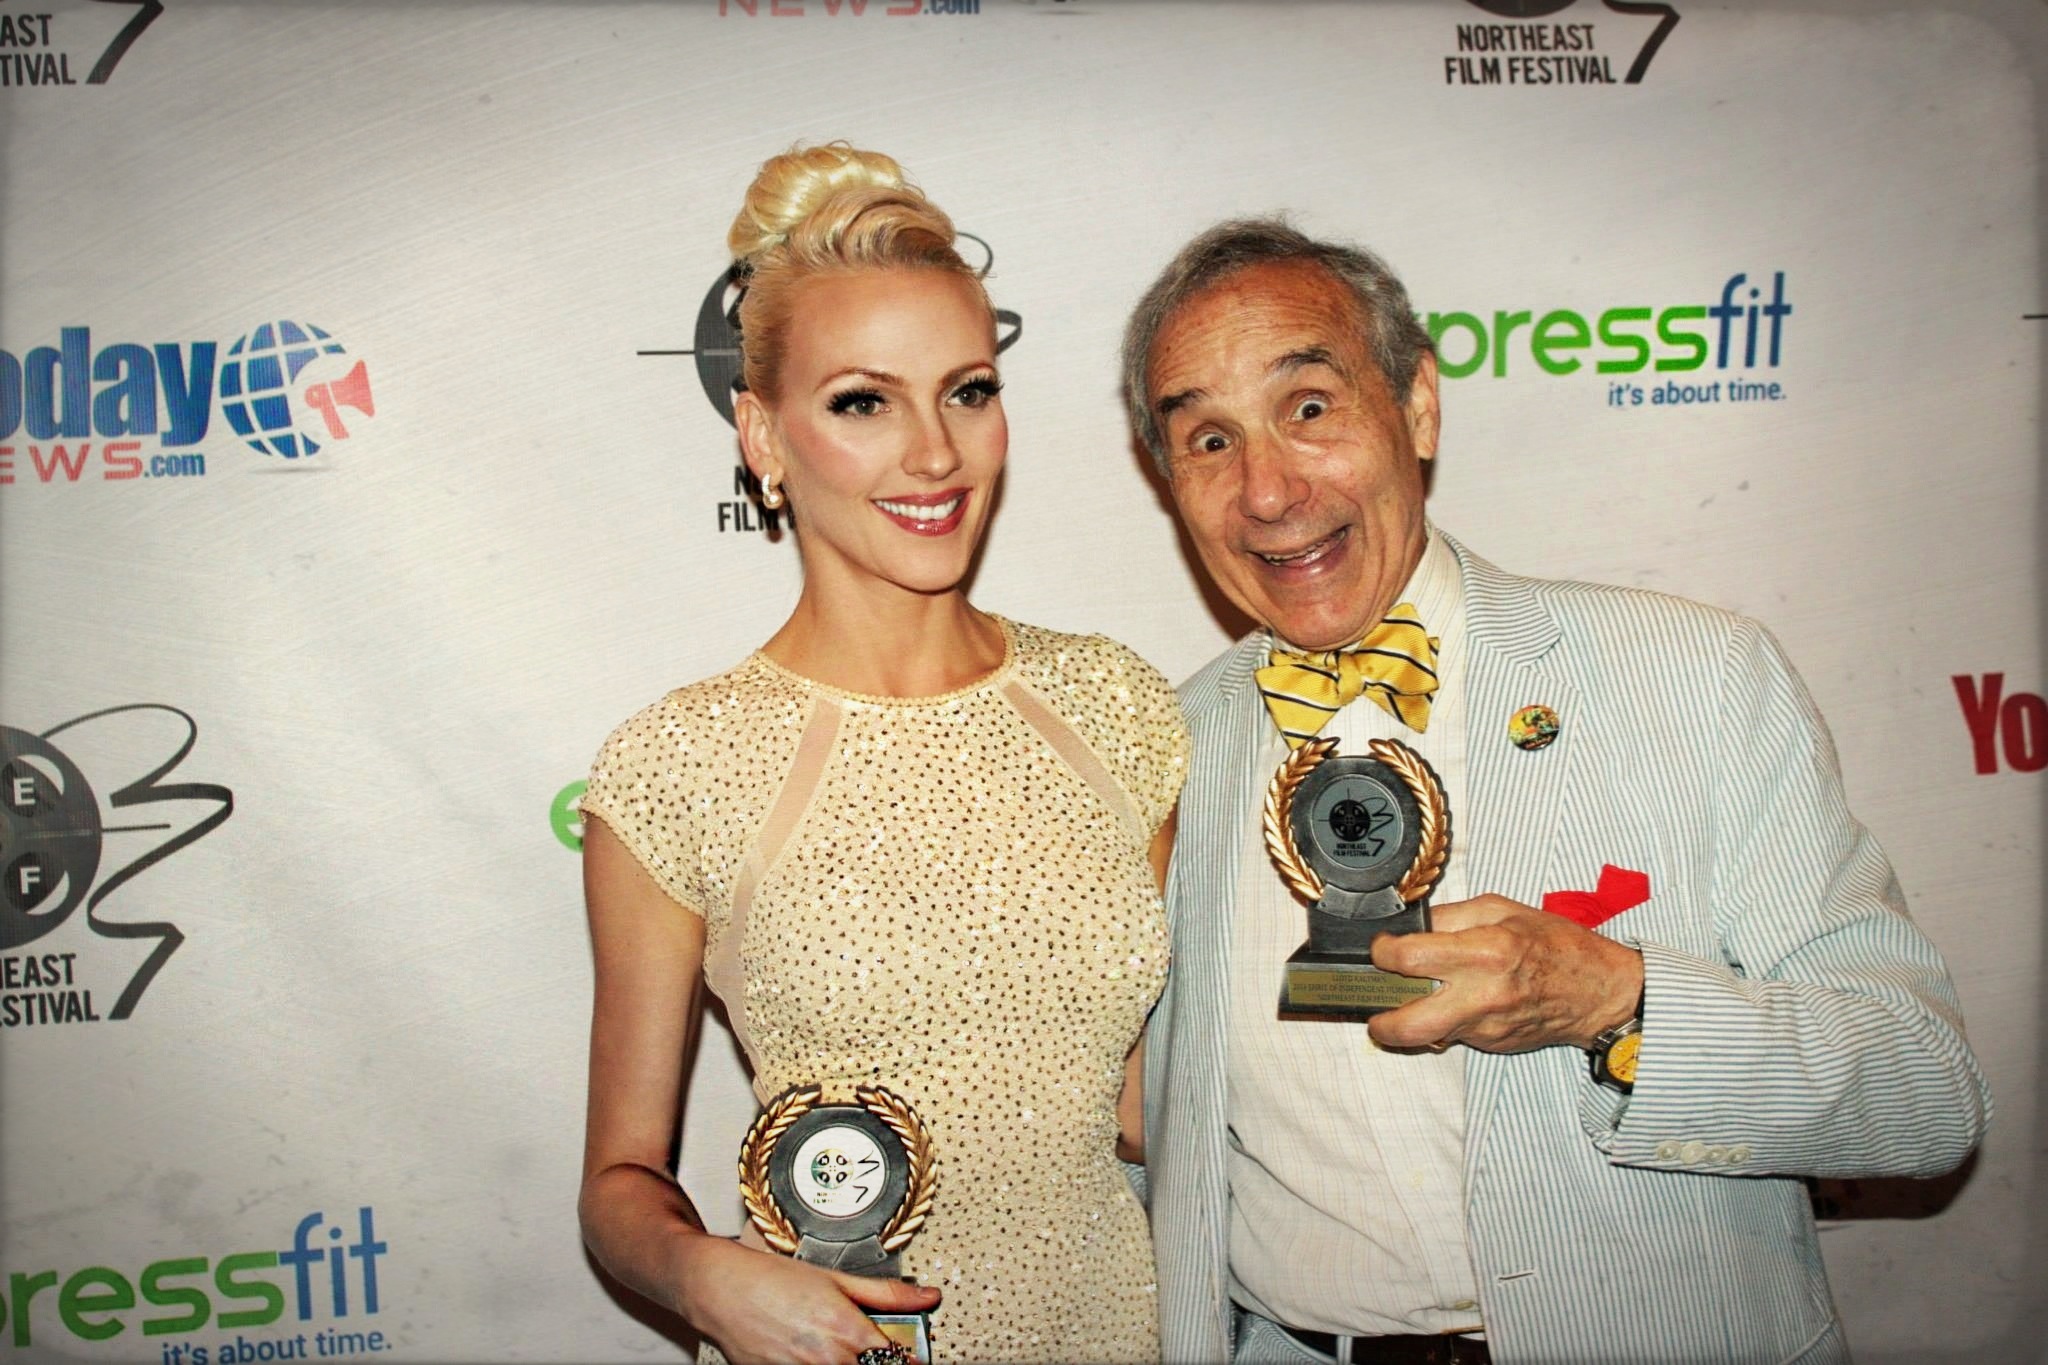 Victoria Gates and Lloyd Kauffman during the Awards Gala at the North East Film Festival.